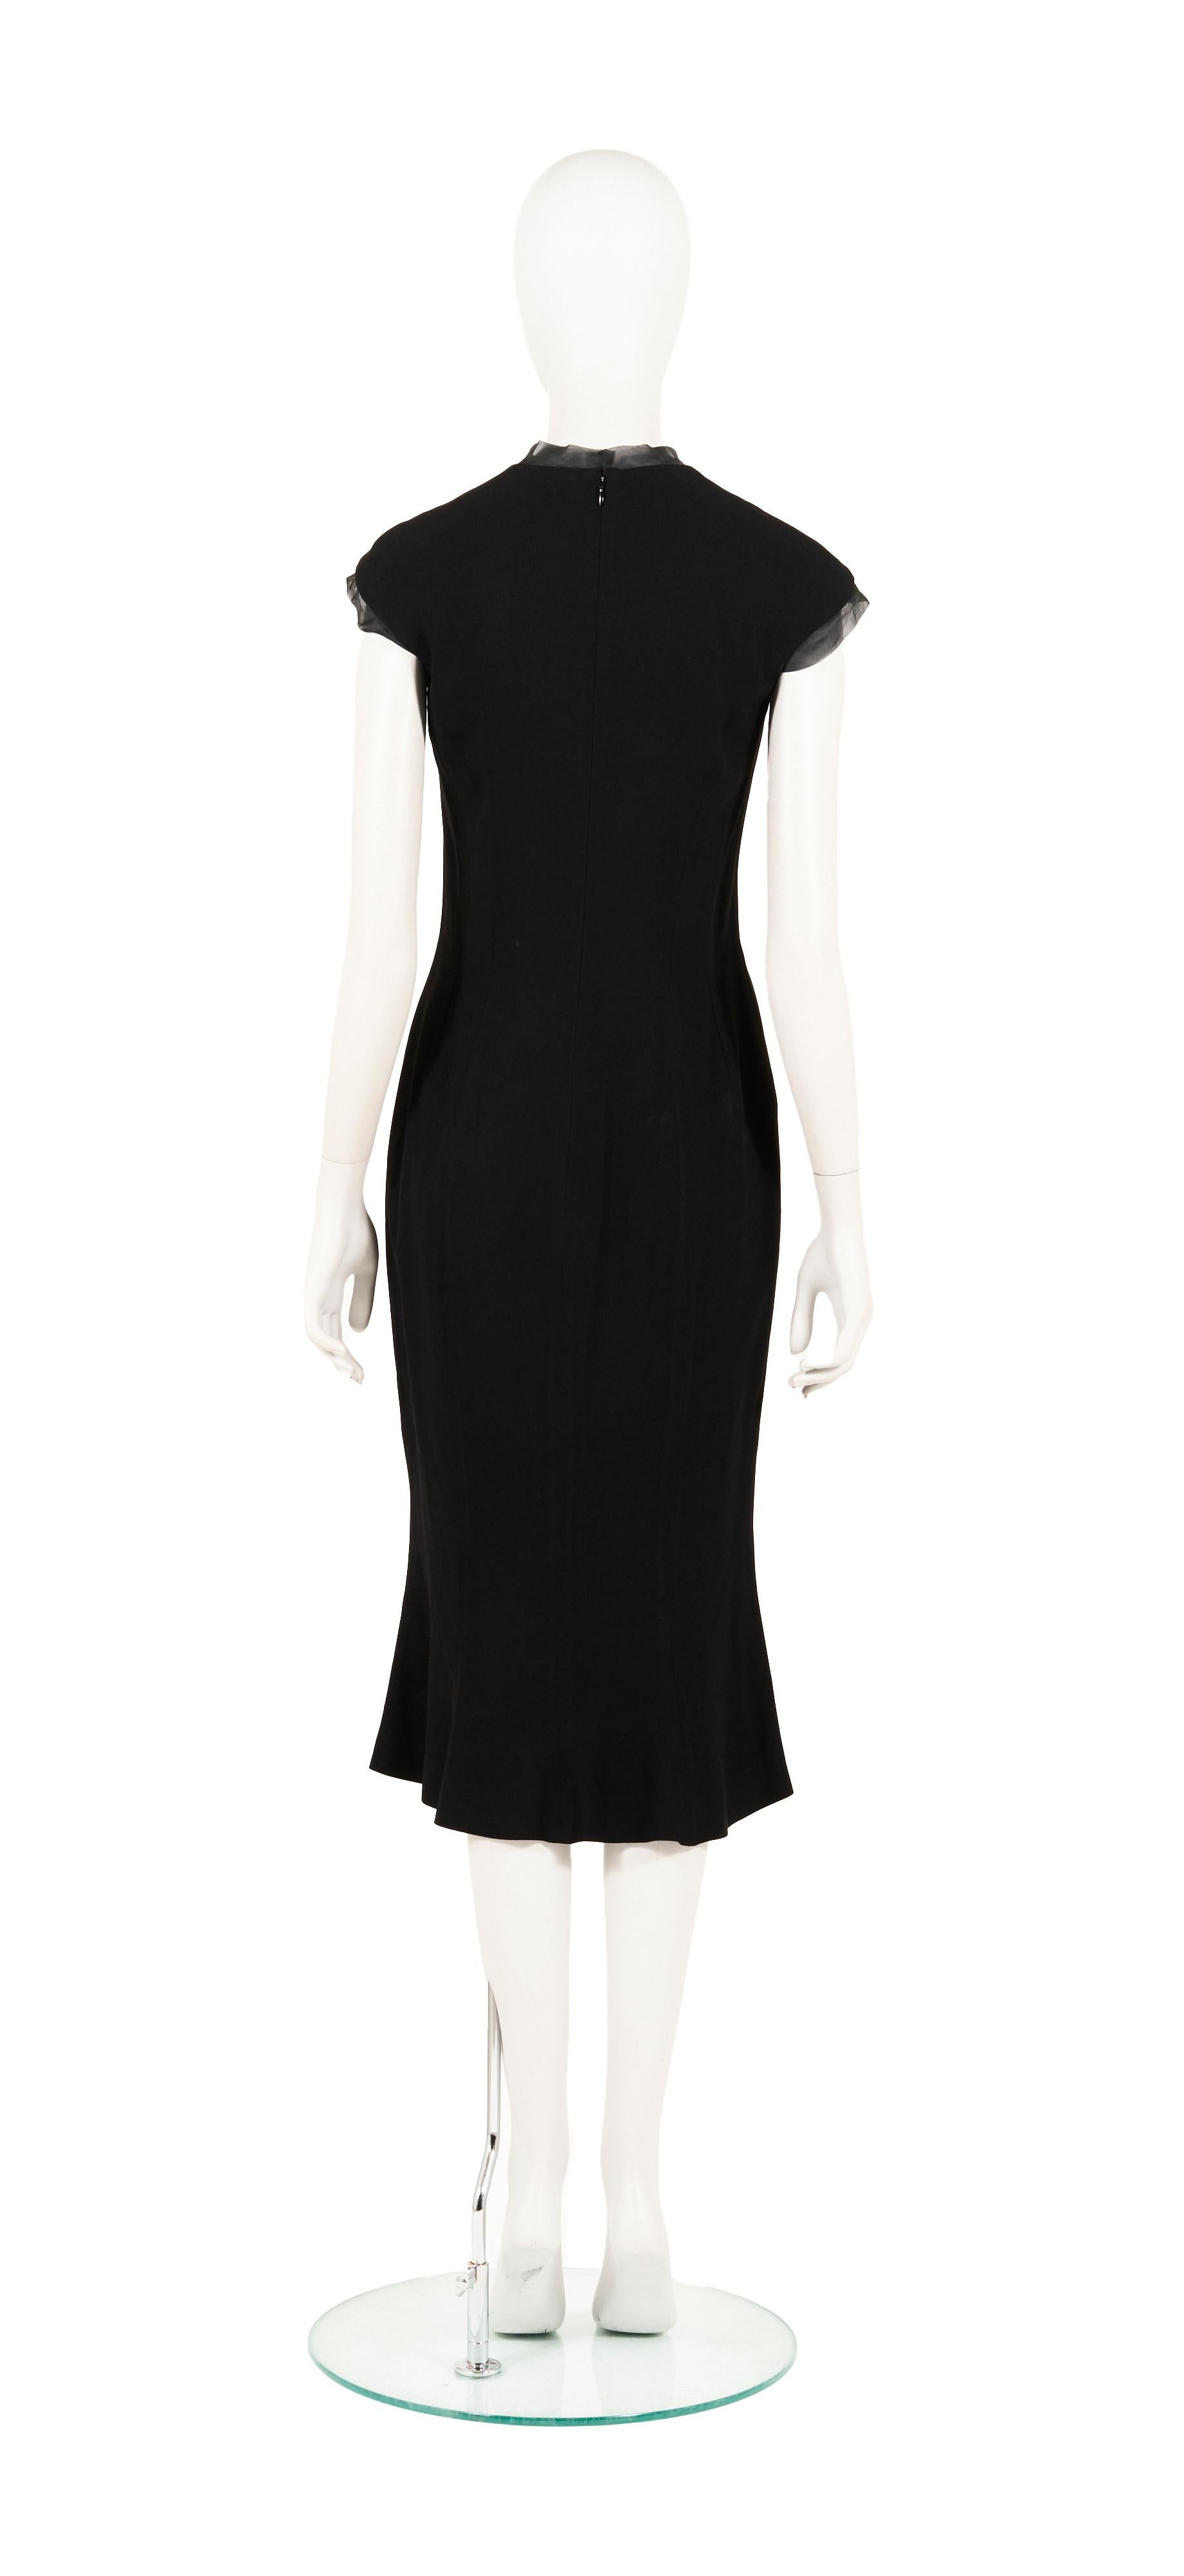 John Galliano S/S 1998 black godet dress  In Excellent Condition For Sale In Rome, IT